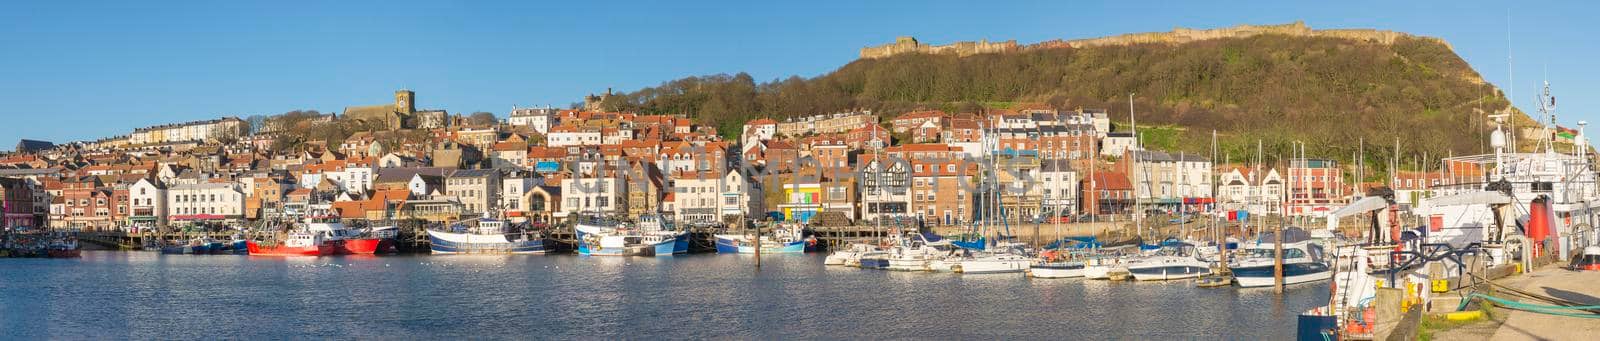 Harbor seafront town with castle on hill by paulvinten